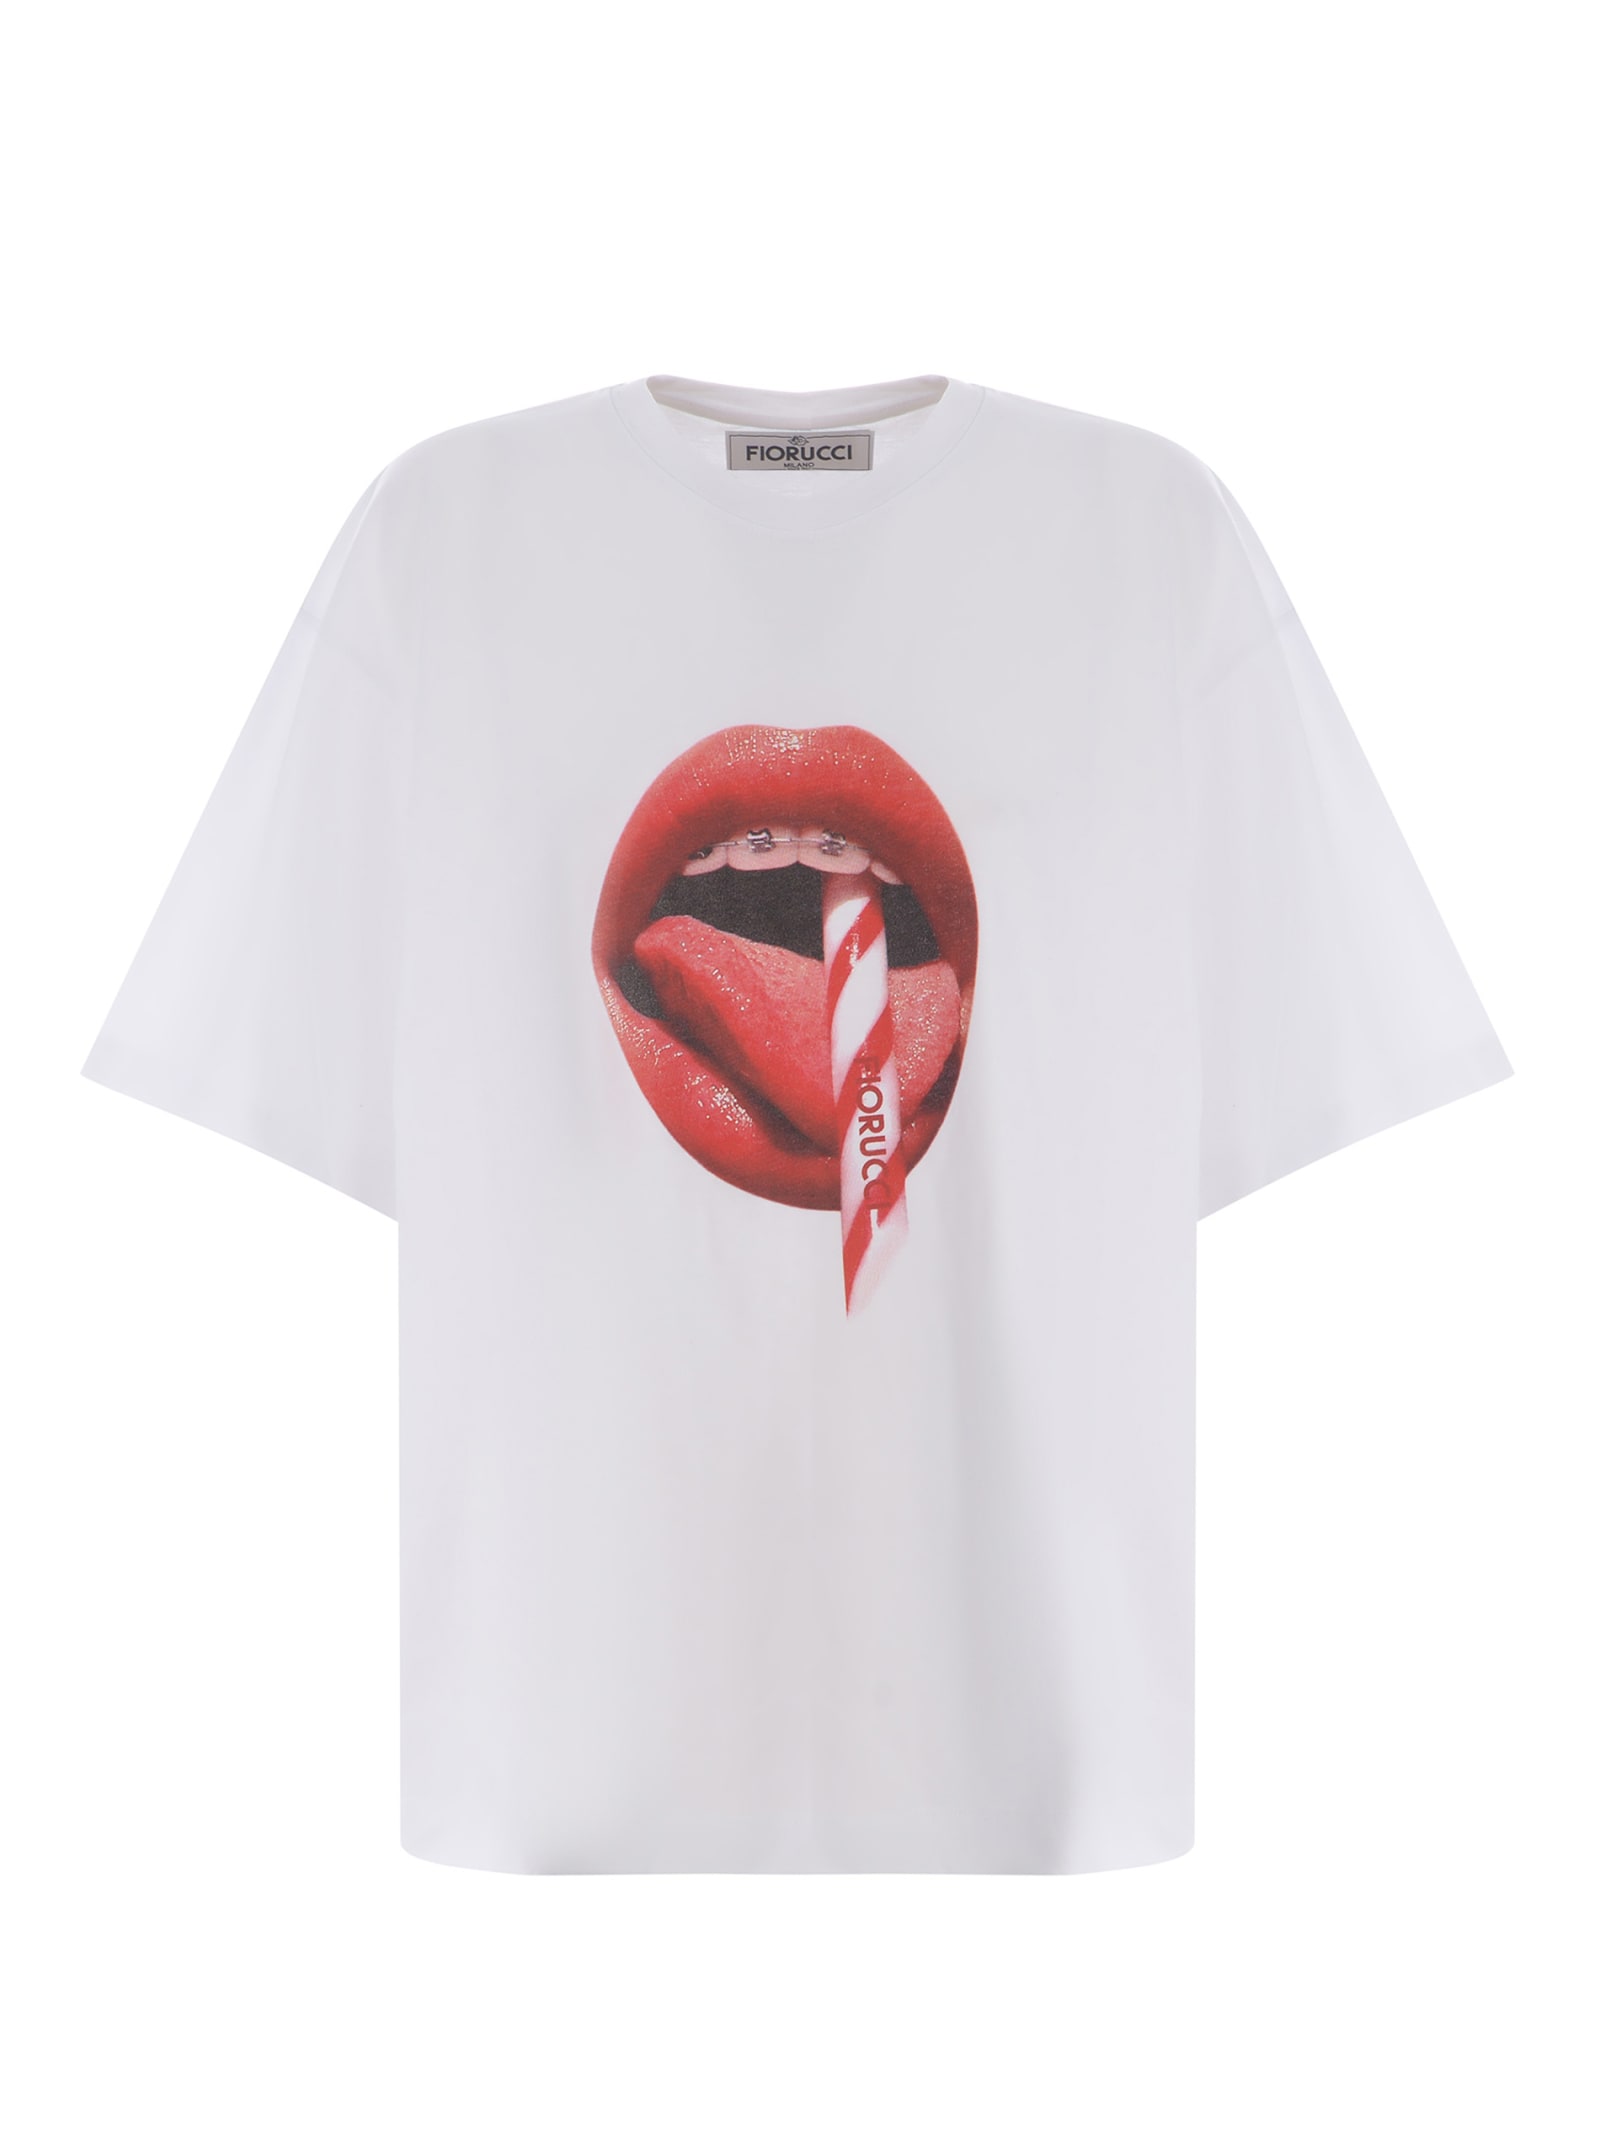 T-shirt Fiorucci mouth Made Of Cotton